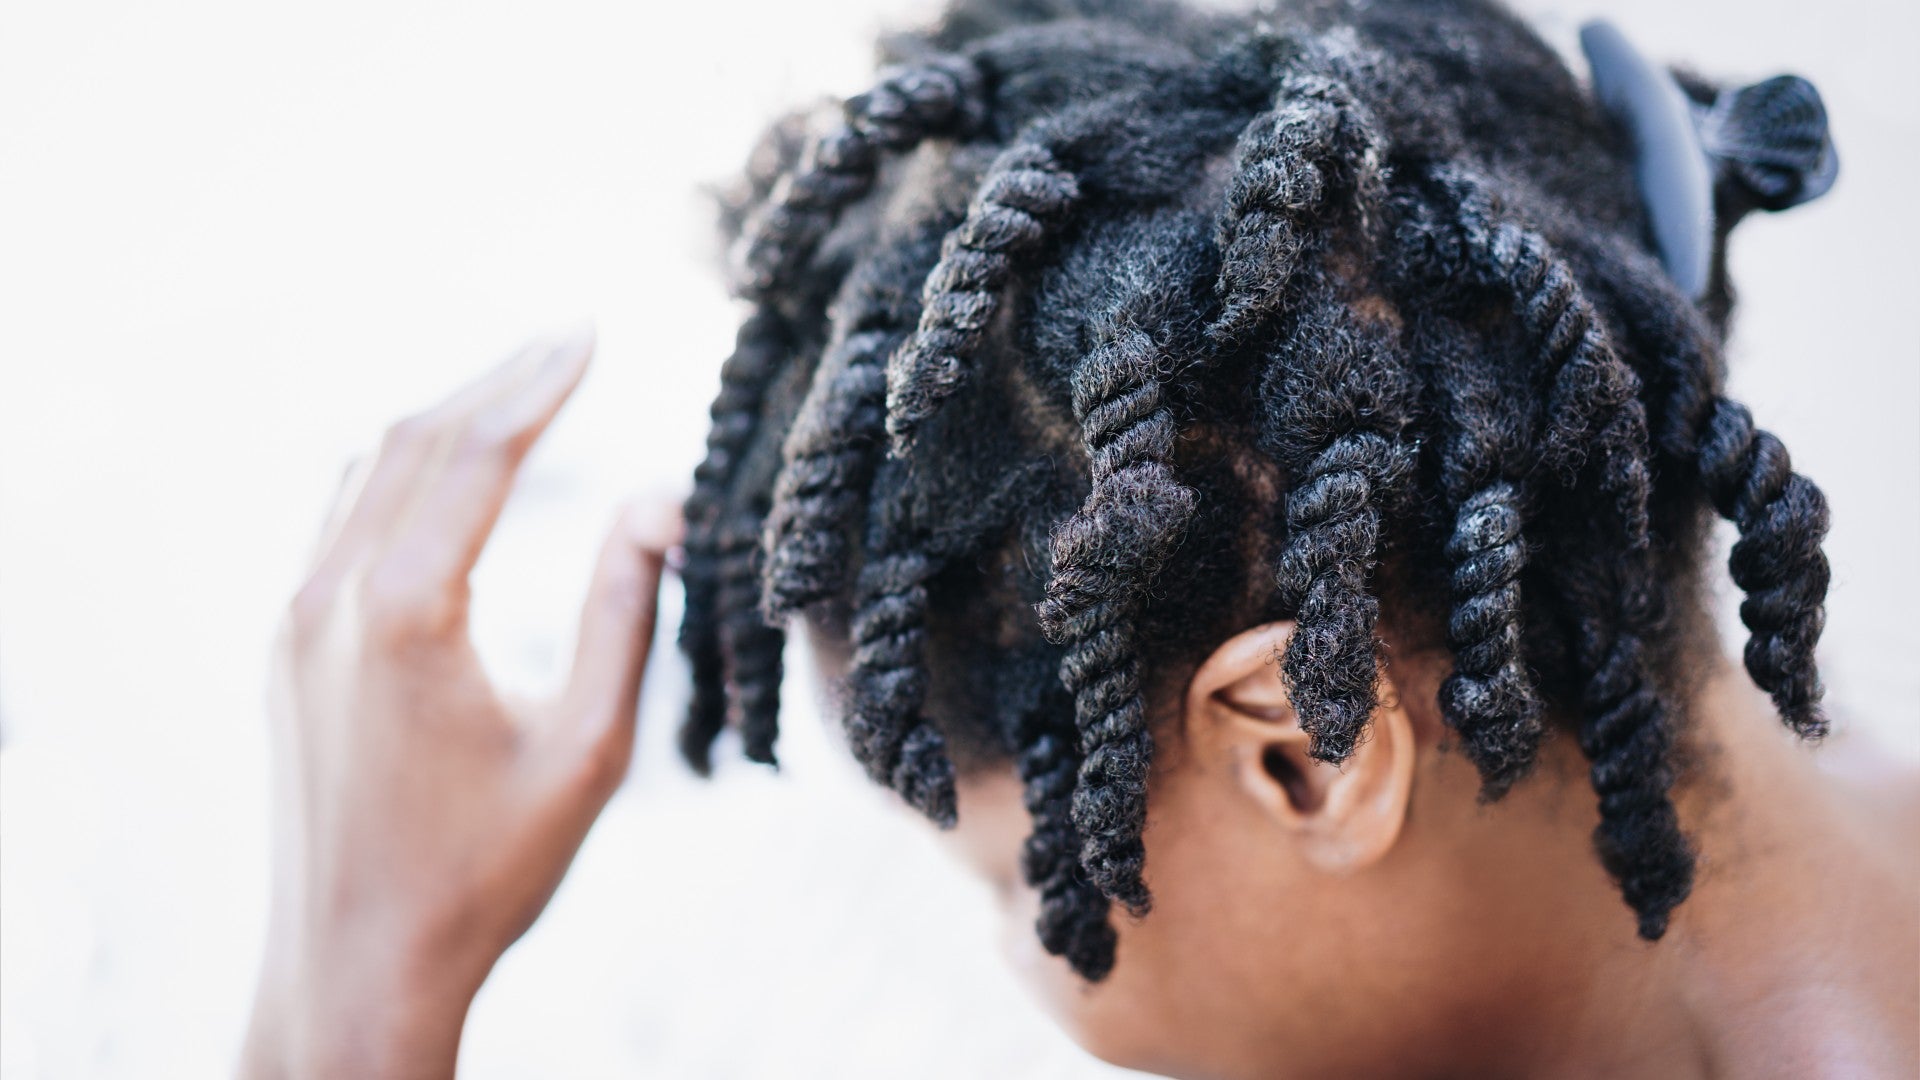 Are Hair Serums Effective On Black Hair?